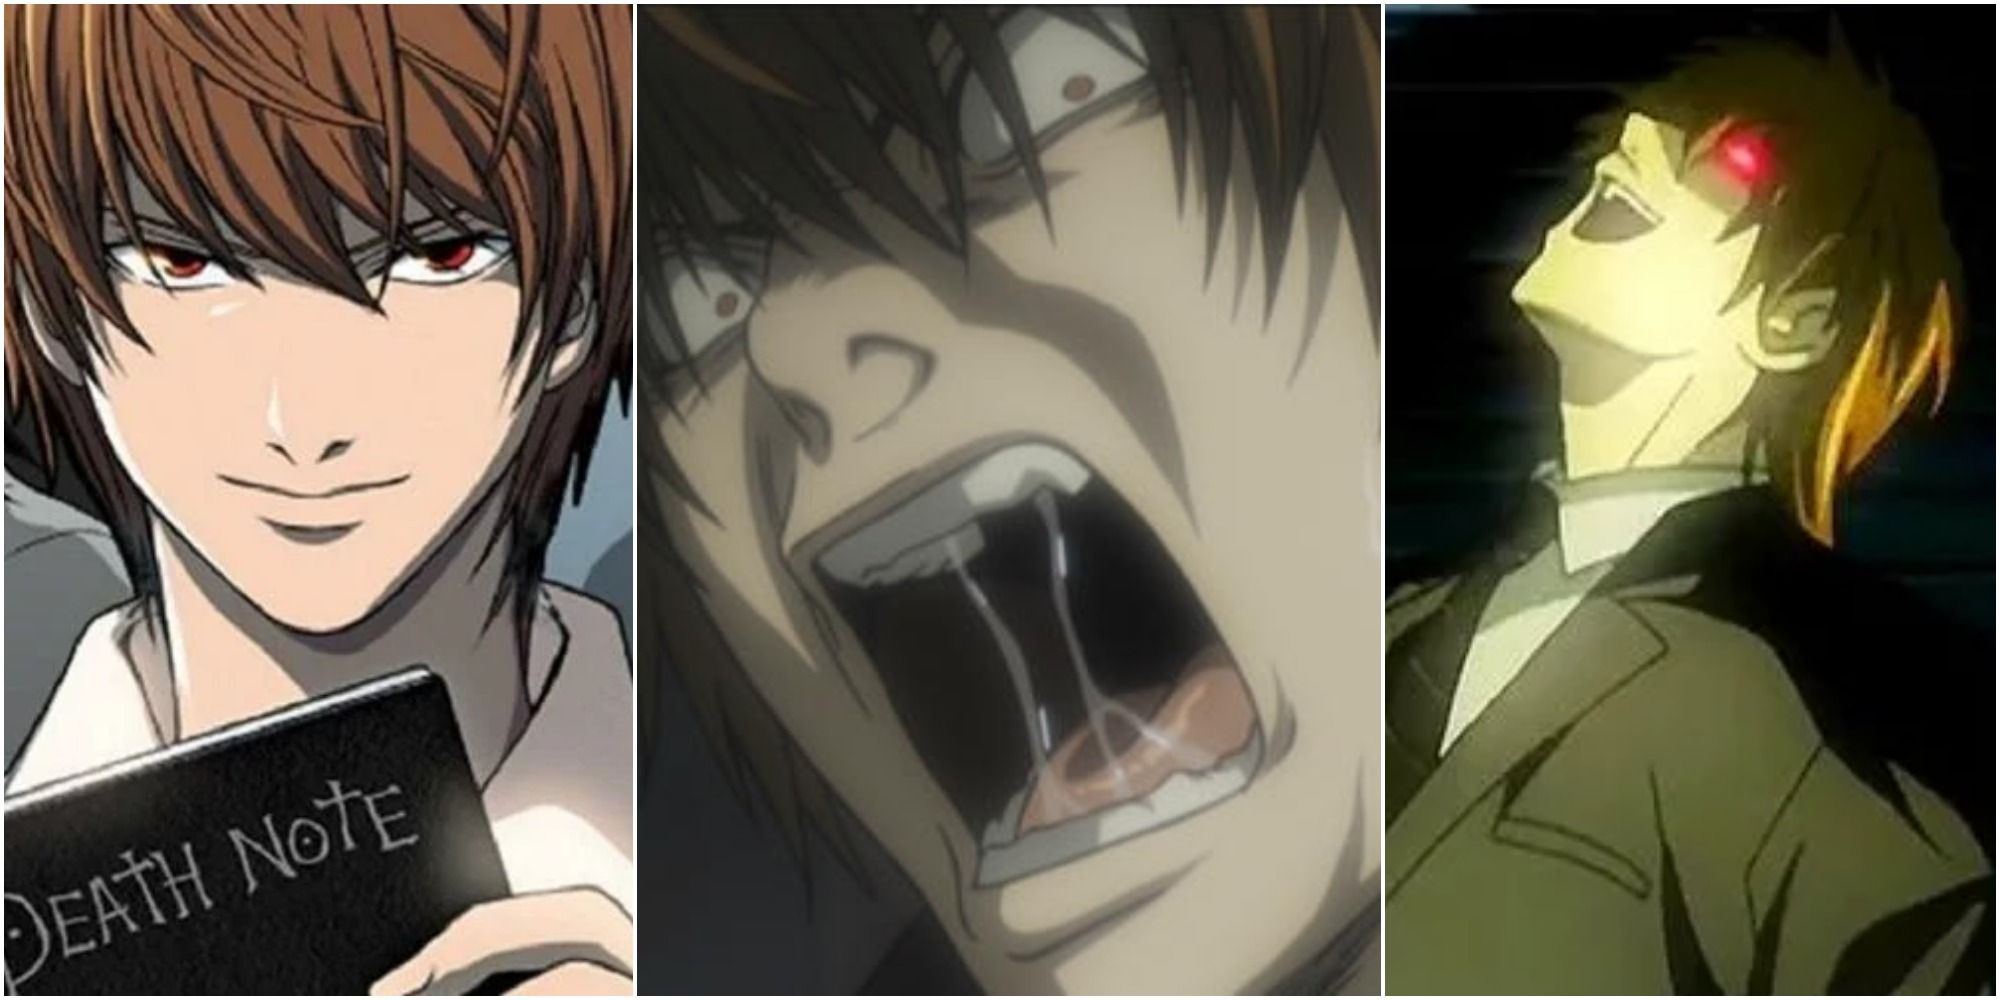 Death Note: 10 Saddest Things About Light Yagami